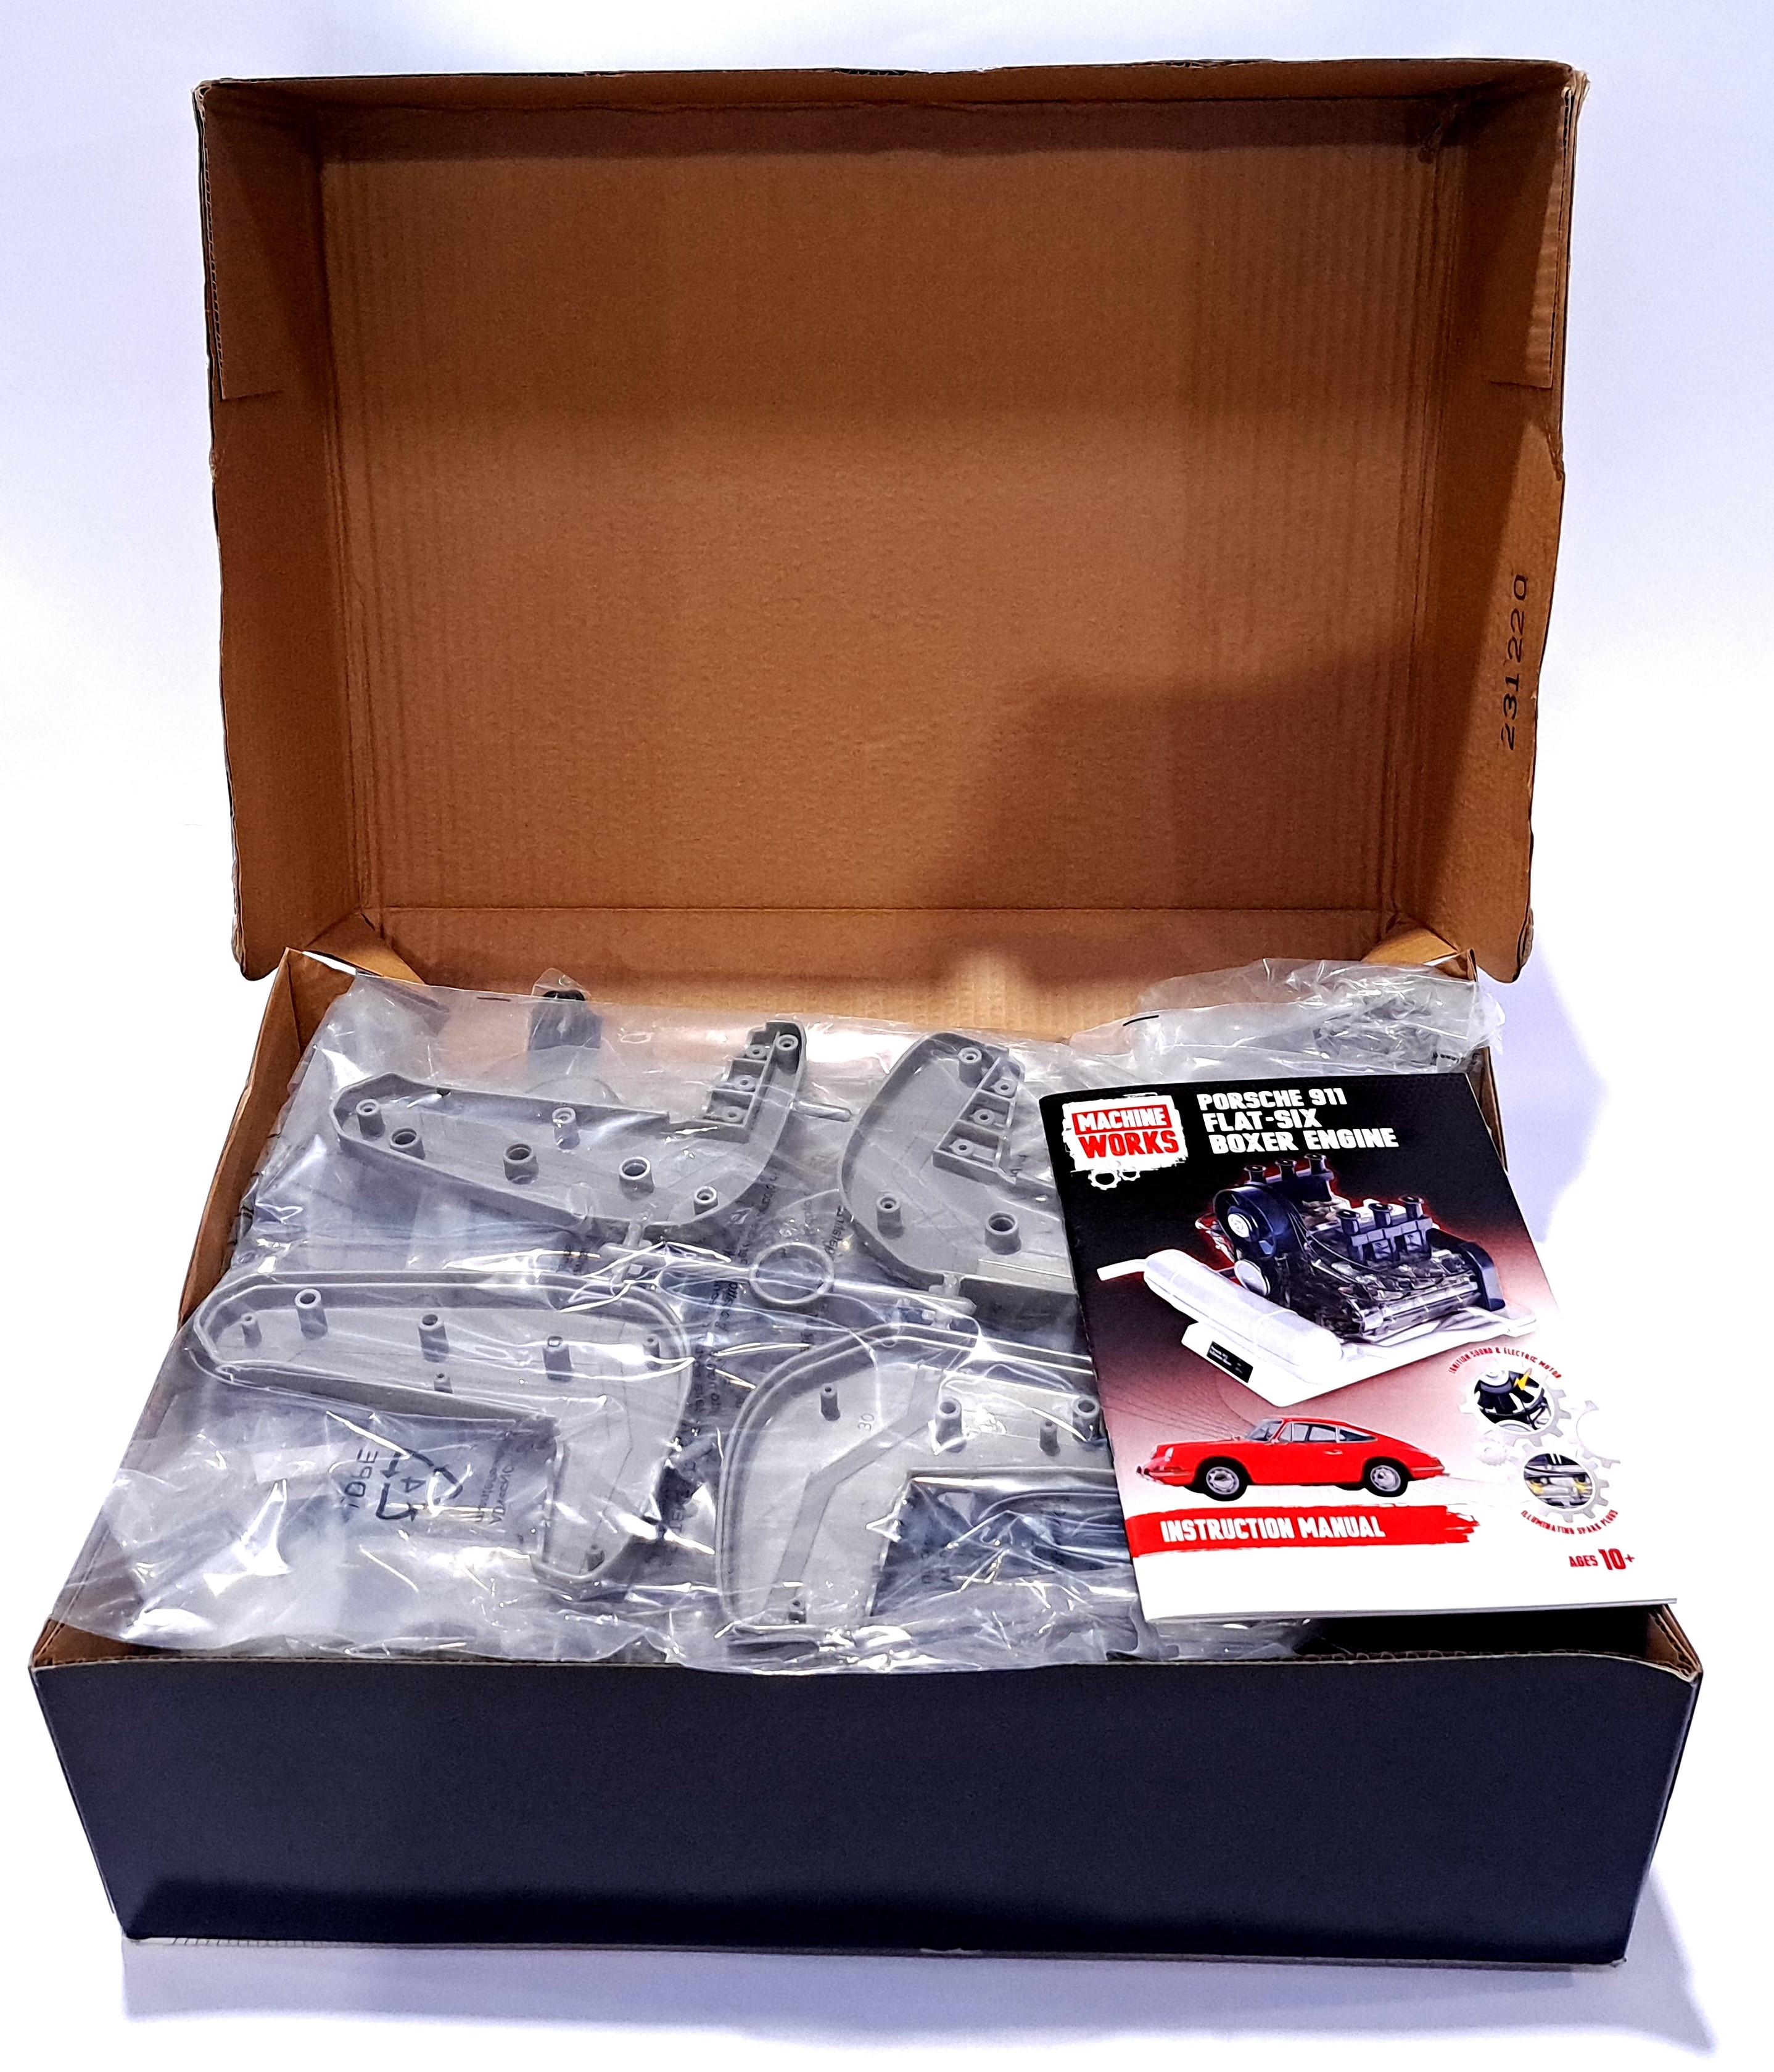 Machine Works Build Your Own Porsche 911 Boxer Engine Toy - Replica Model Building Kit - Features... - Image 2 of 2